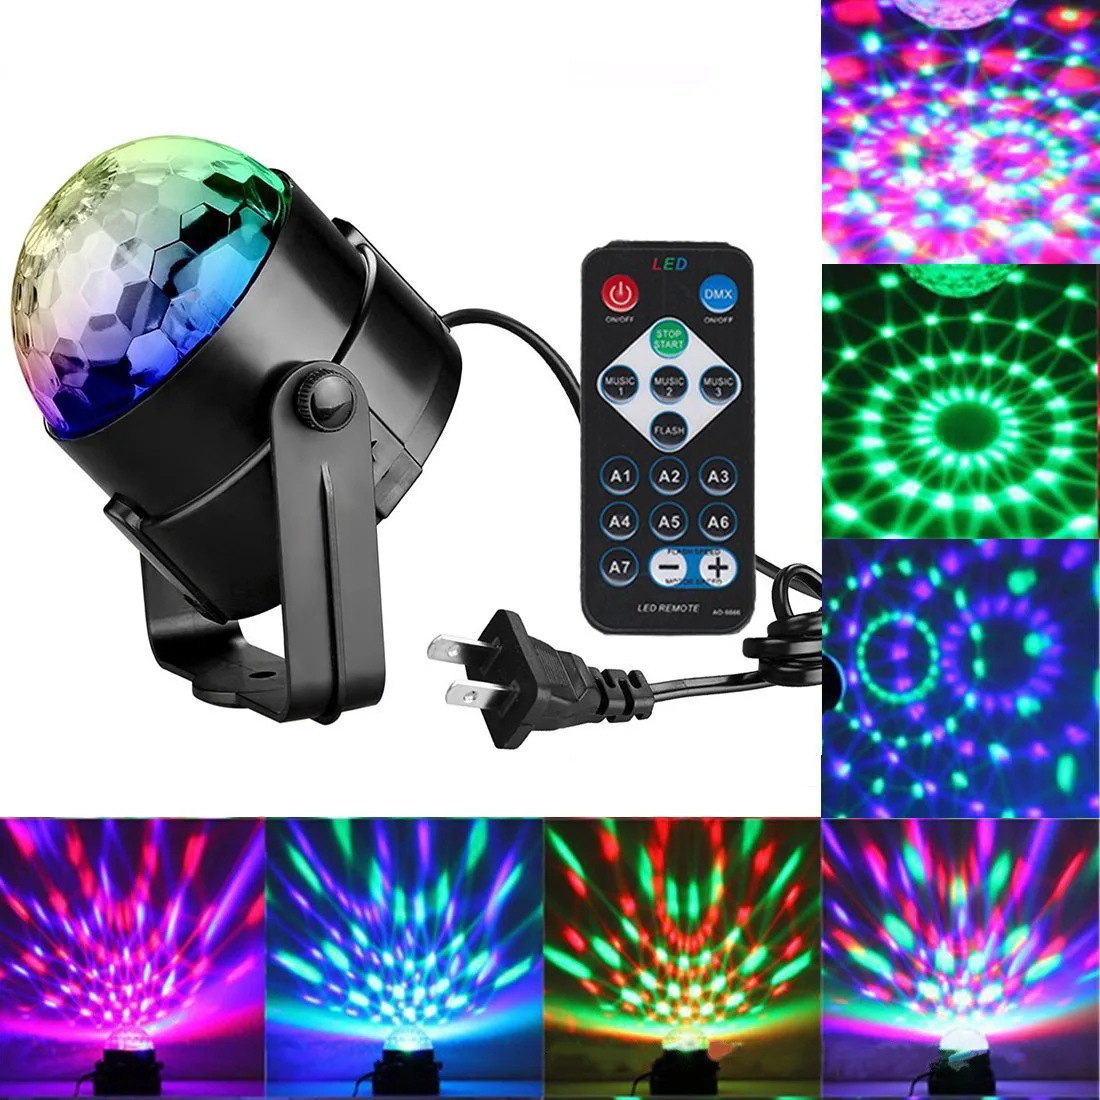 Remote Control Disco Light Party Decoration Light Music Christmas Lights Party Lights Disco Ball Christmas Decorations for Home red green laser lumiere blue leds light and music equipment for disco machine onthe remote control soundlights